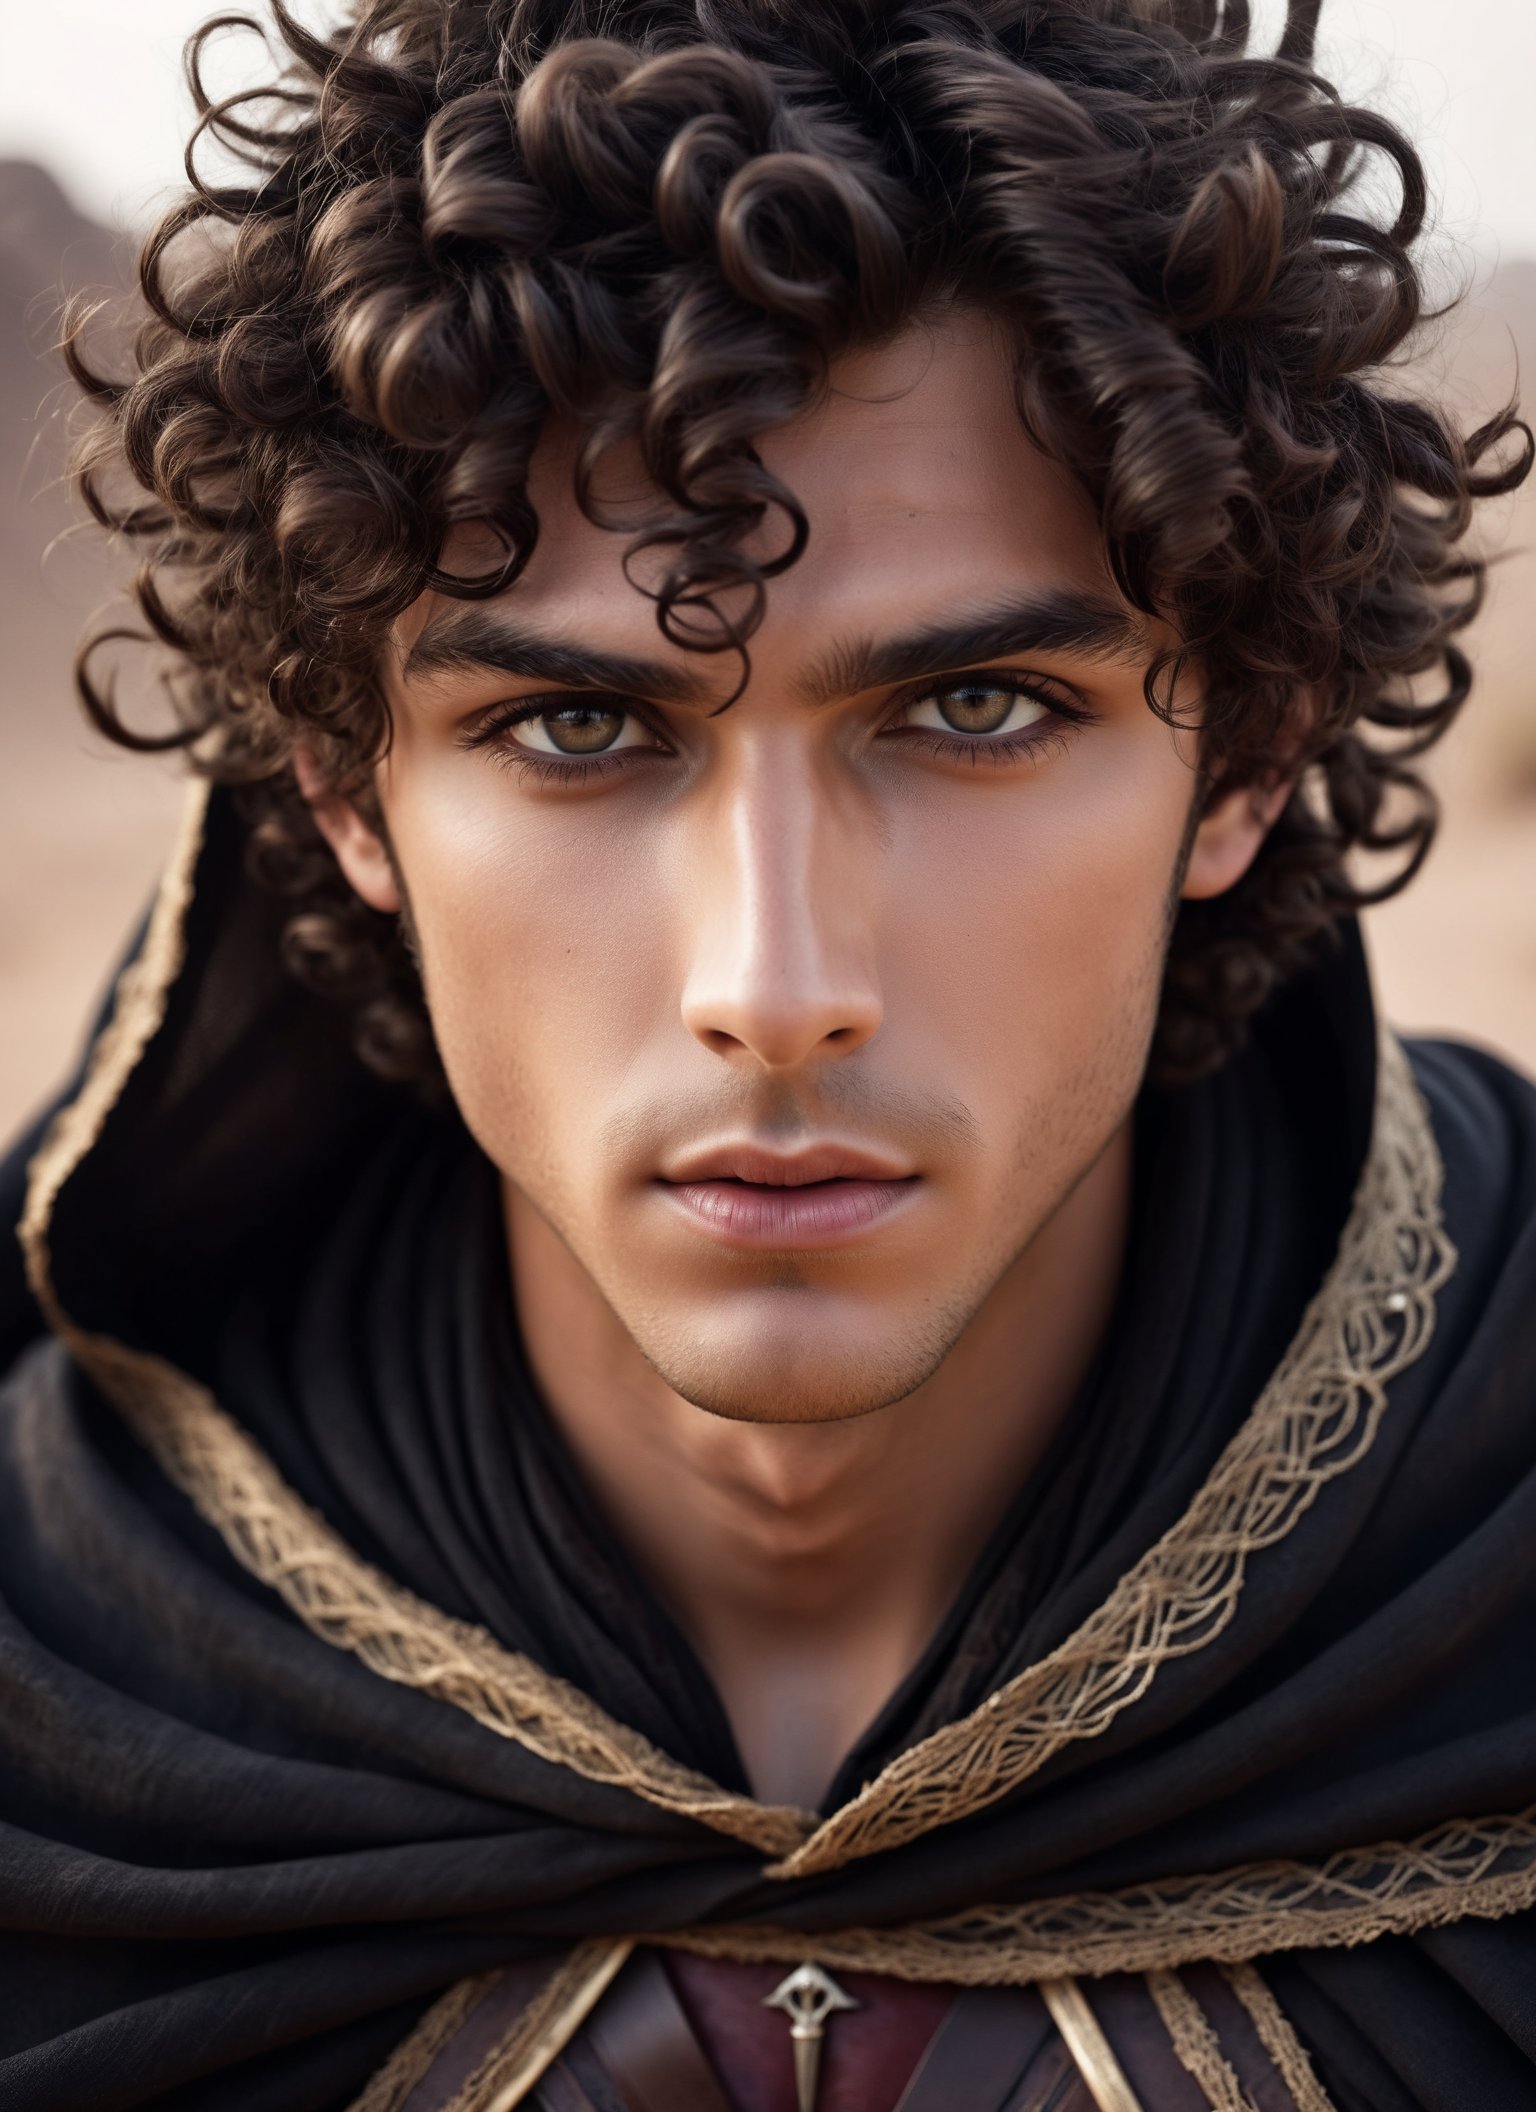 photorealistic Close-up portrait photography, (Enthralling male youth with intense gaze:1.3), Earthy-toned mesmerizing eyes, (Dark curly tufts:1.3), Stylish assassin costume, Flowing cape, Desert backdrop, Foggy ethereal veil, Dreamy setting, Film grain texture . highly detailed, lifelike, precise, accurate